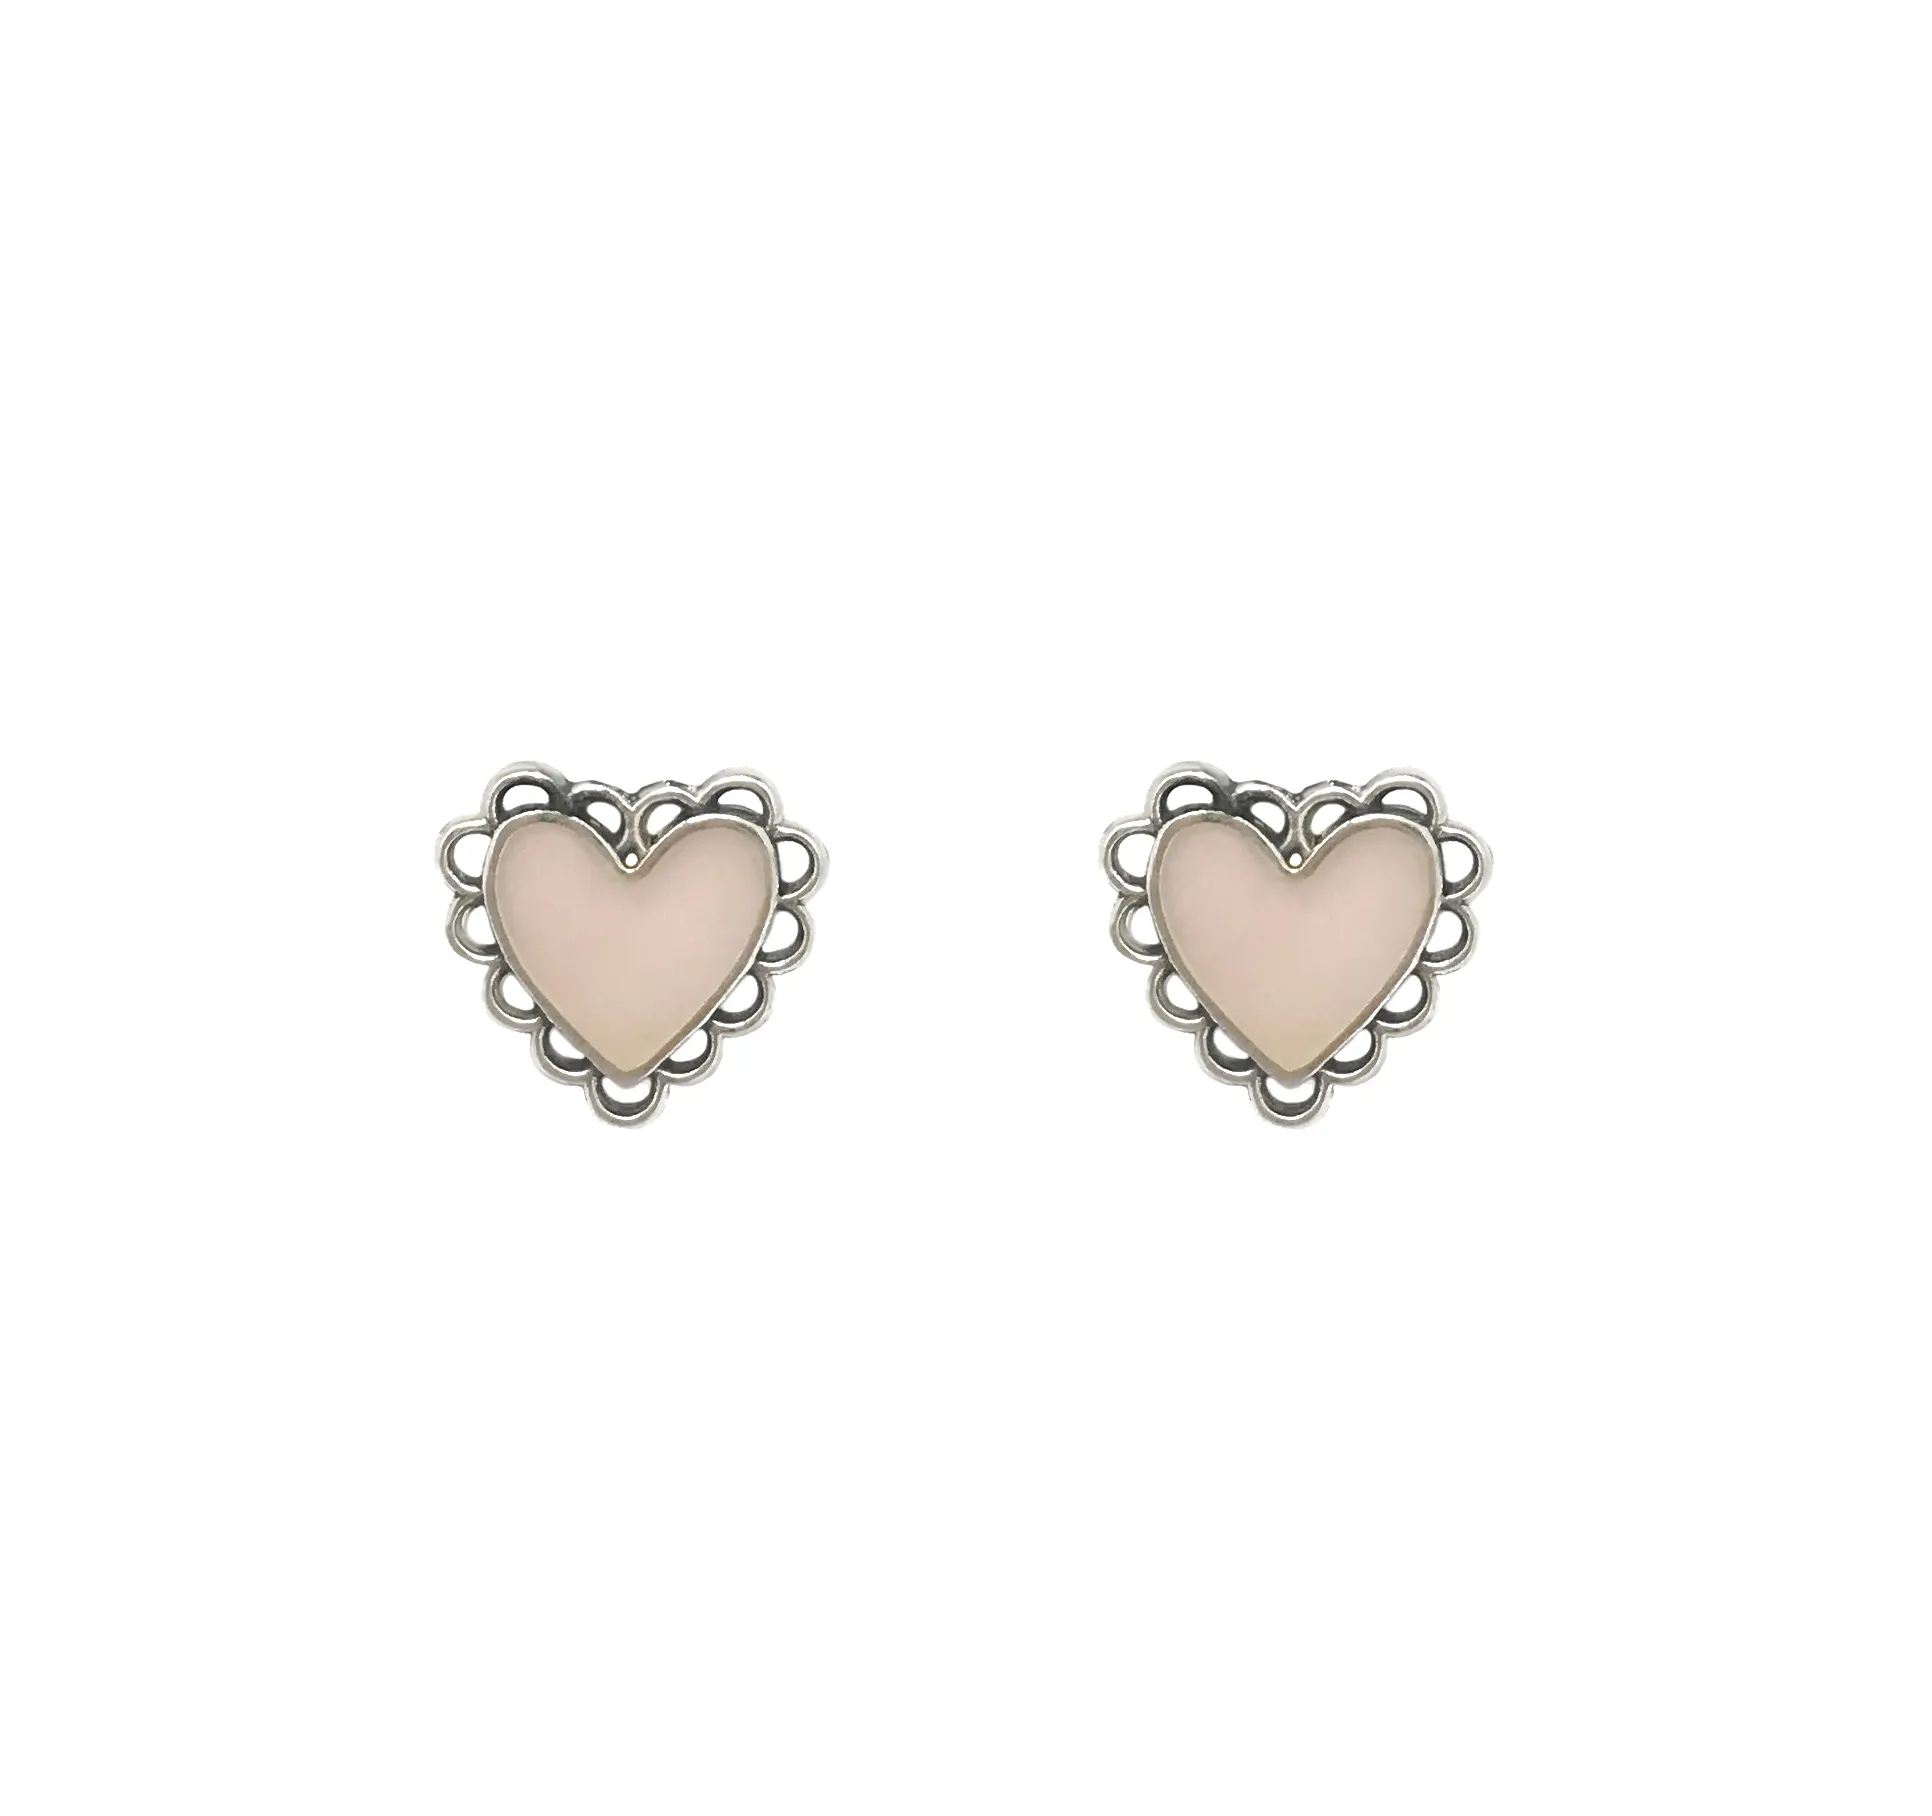 High quality Italian Heart button enameled earrings made by 925 sterling silver for special events